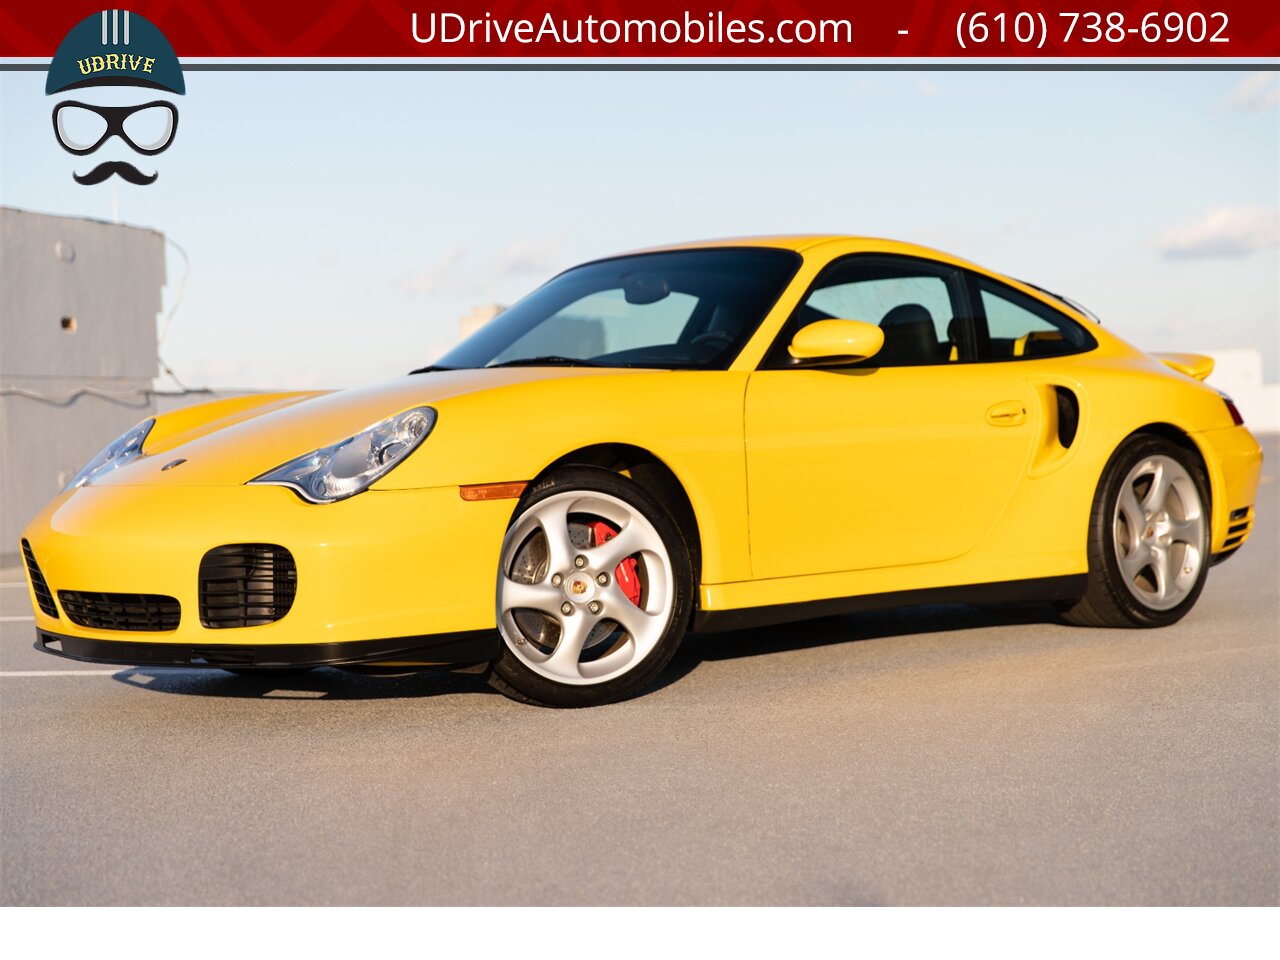 2001 Porsche 911 Turbo 996 6 Sp PTS Ferrari Giallo Modena  FULL Carbon Pkg 1 of a Kind Paint to Sample - Photo 1 - West Chester, PA 19382